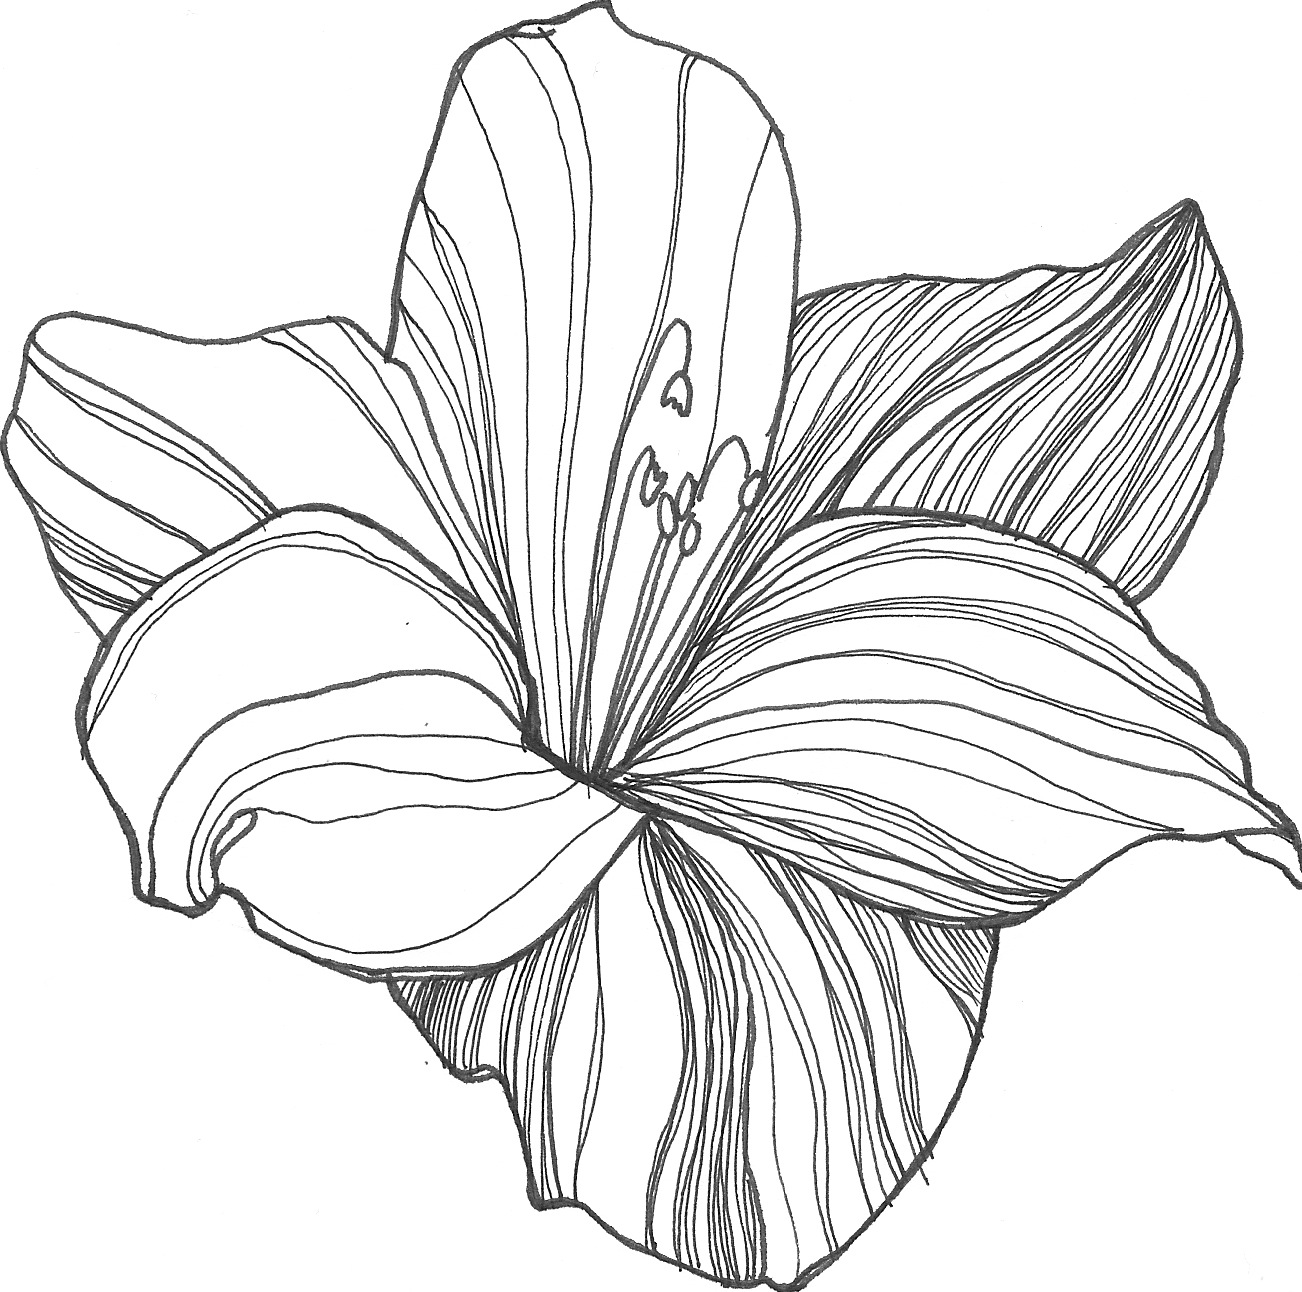 Flowers Drawings - Good Flower Pictures